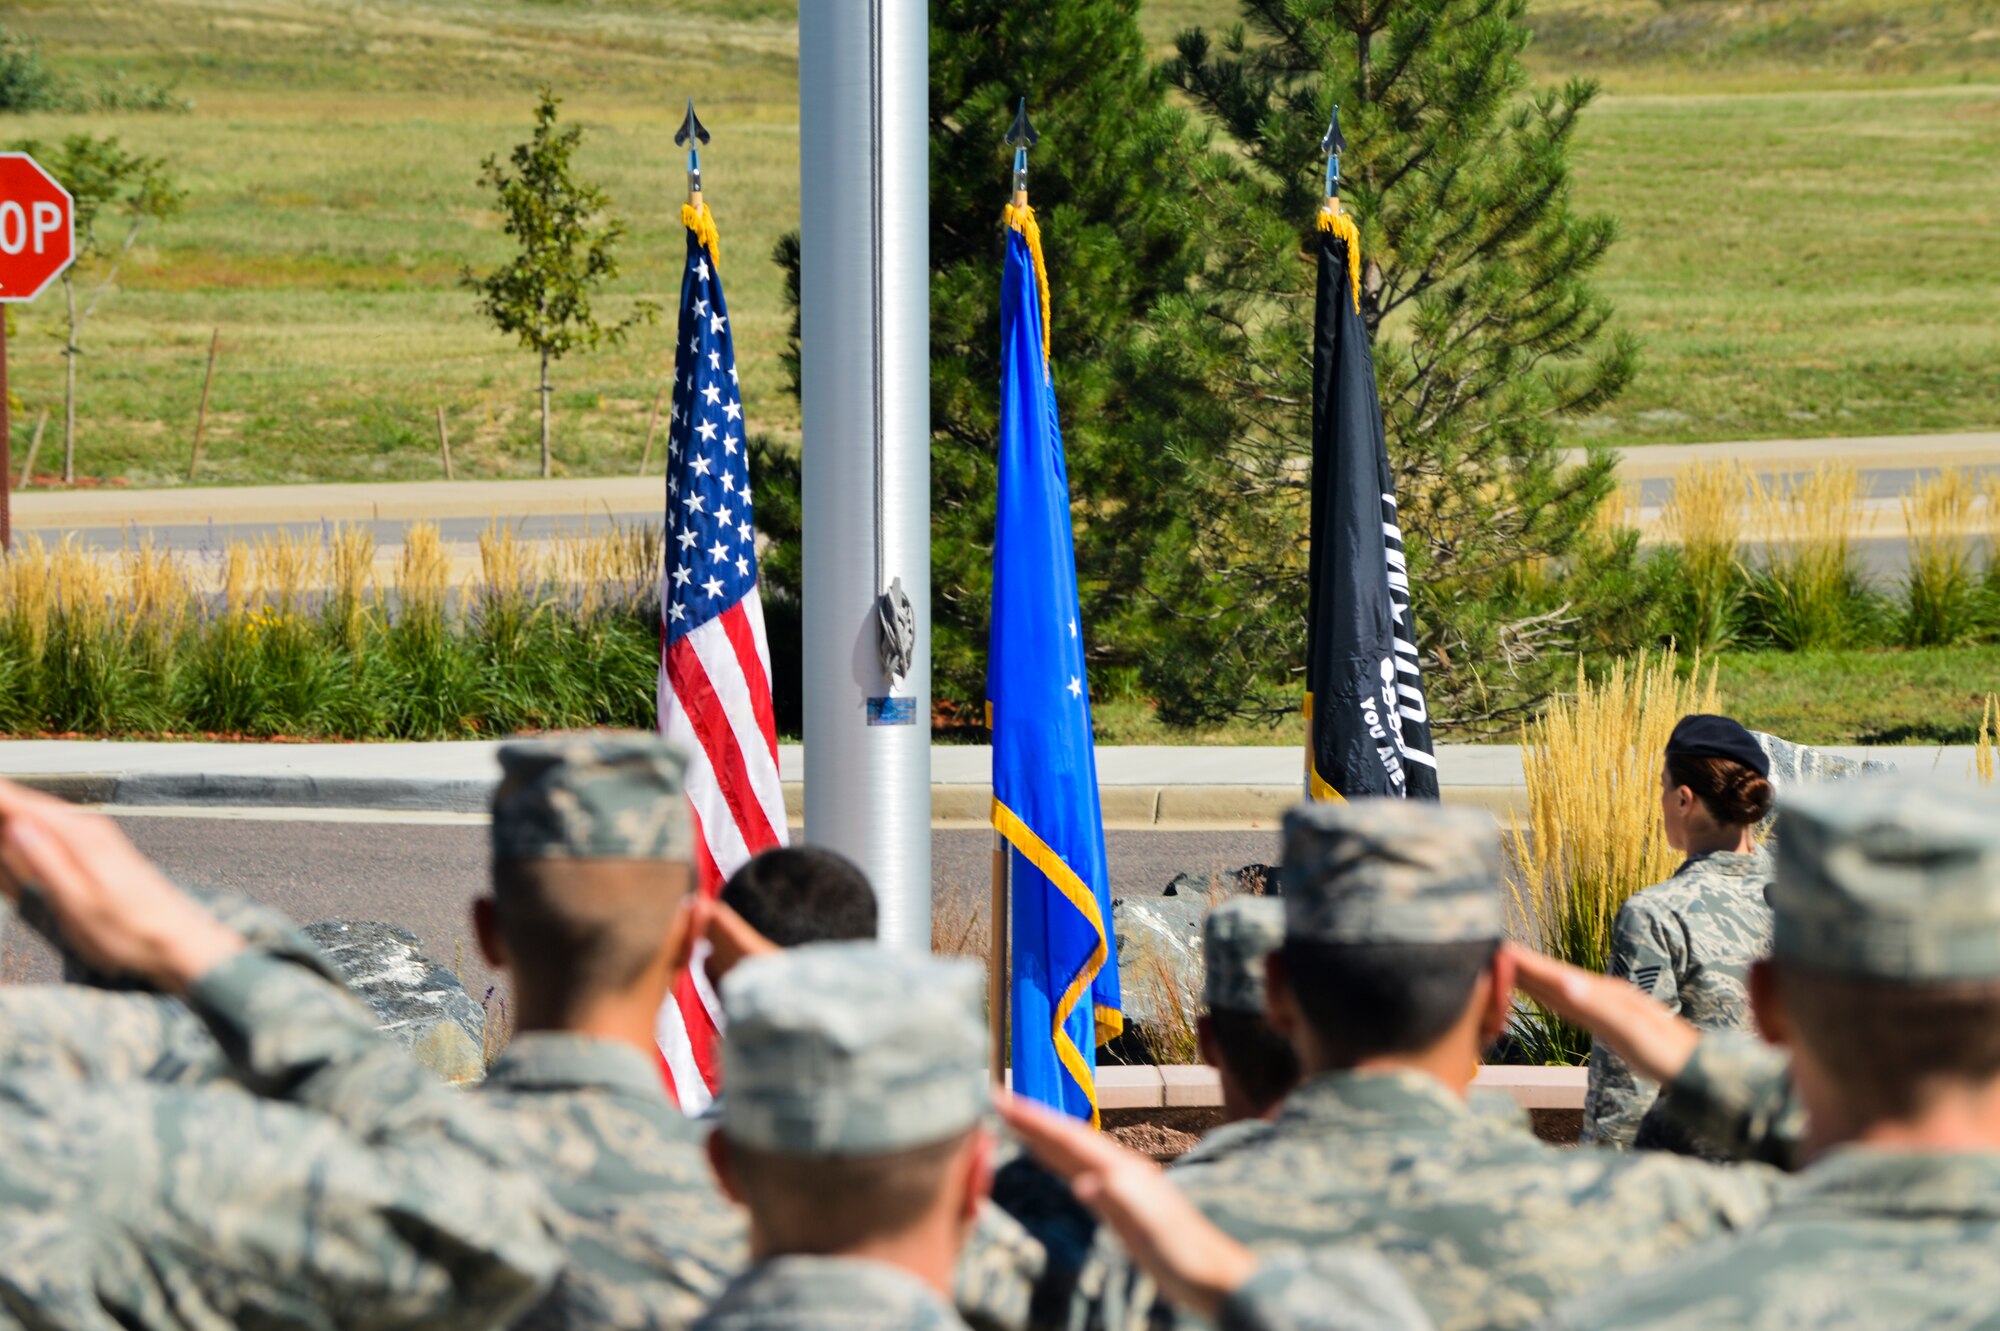 Team Buckley service members salute the American flag during the National POW/MIA Recognition Day ceremony Sept. 20, 2013, at the 460th Space Wing headquarters building on Buckley Air Force Base, Colo. National POW/MIA Recognition Day is traditionally observed the third Friday of September. (U.S. Air Force photo by Staff Sgt. Paul Labbe/Released)